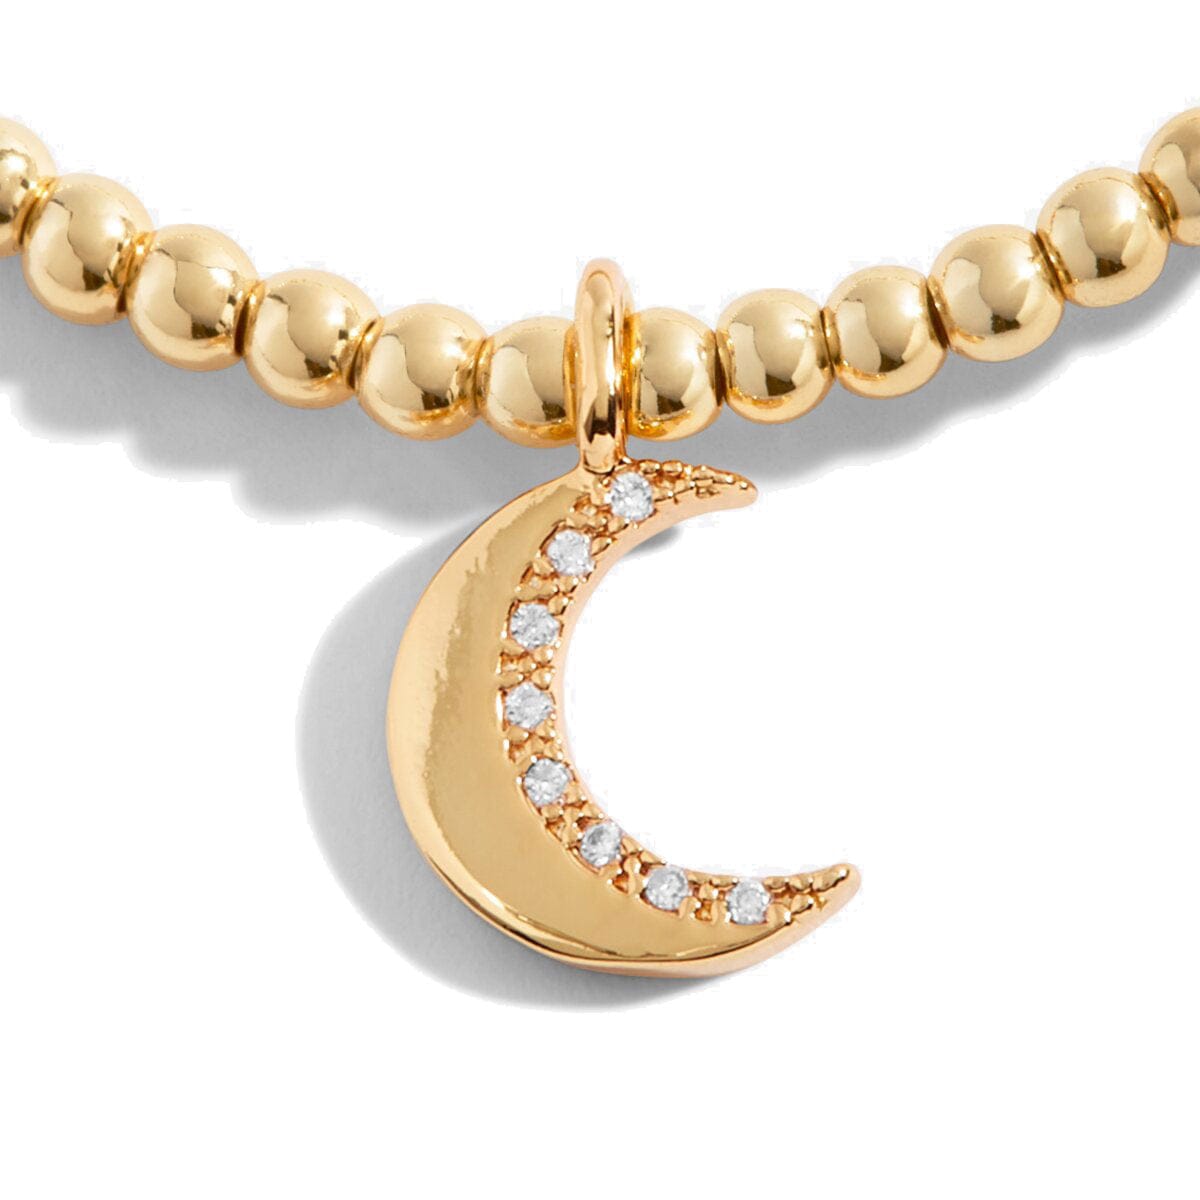 Joma Jewellery Bracelet Joma Jewellery Bracelet - A Little Gold Love You To The Moon And Back